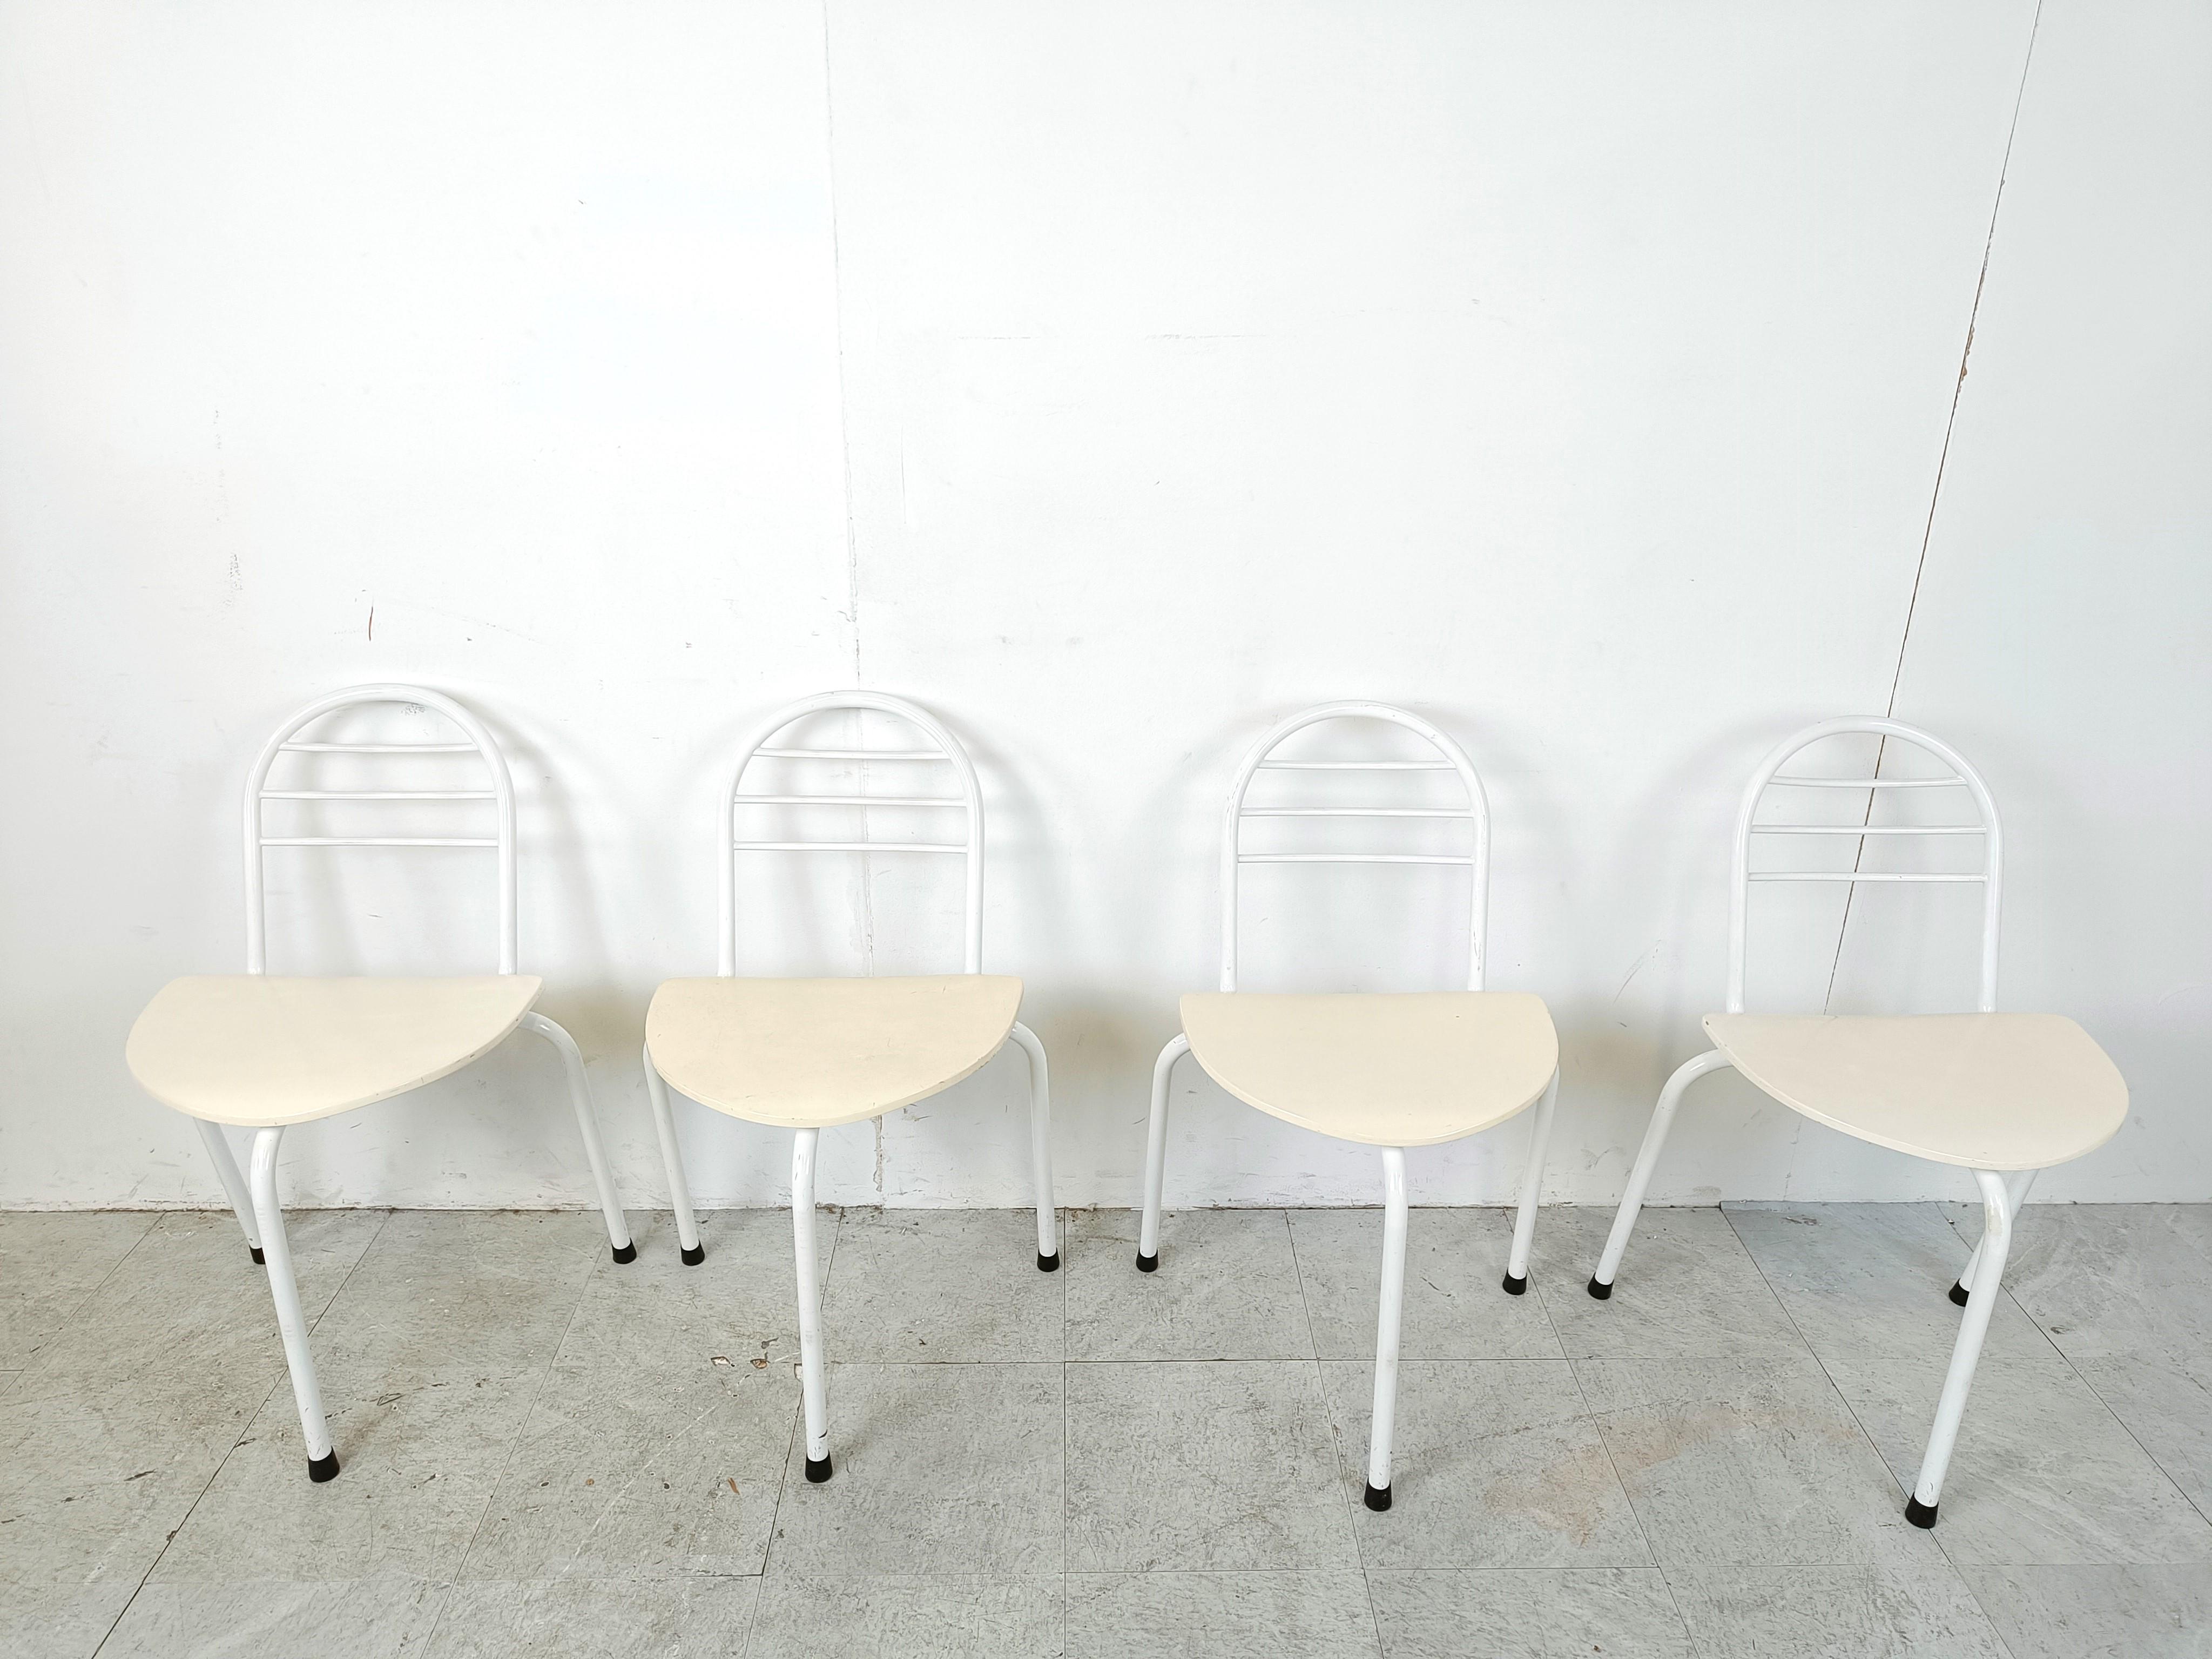 Set of 4 unique postmodern tripod dining chairs with a white lacquered metal frame and wooden seats.

Timeless design 

Good condition with normal age related wear.

1980s - Belgium

Dimensions:
Height: 75cm/29.48